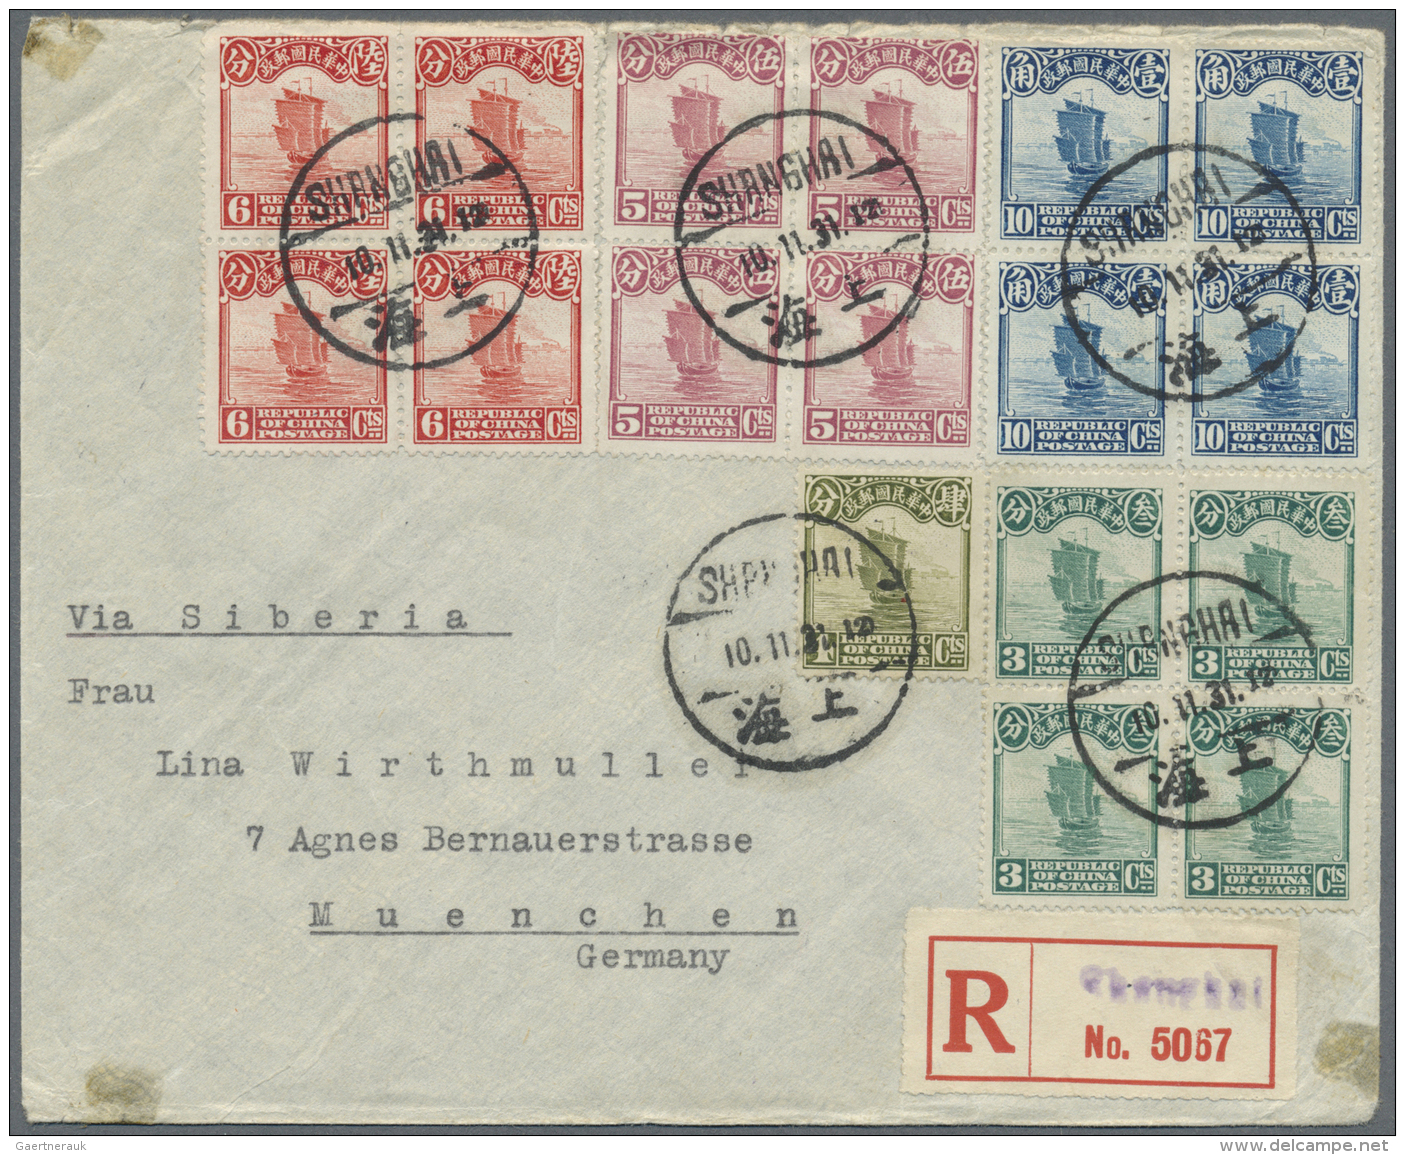 China: 1923, Junk 3 C., 4 C., 5 C., 10 C. Each In Blocks-4 With 4 C. Olive Tied "SHANGHAI 10.11.31" To Registered Cover - Covers & Documents